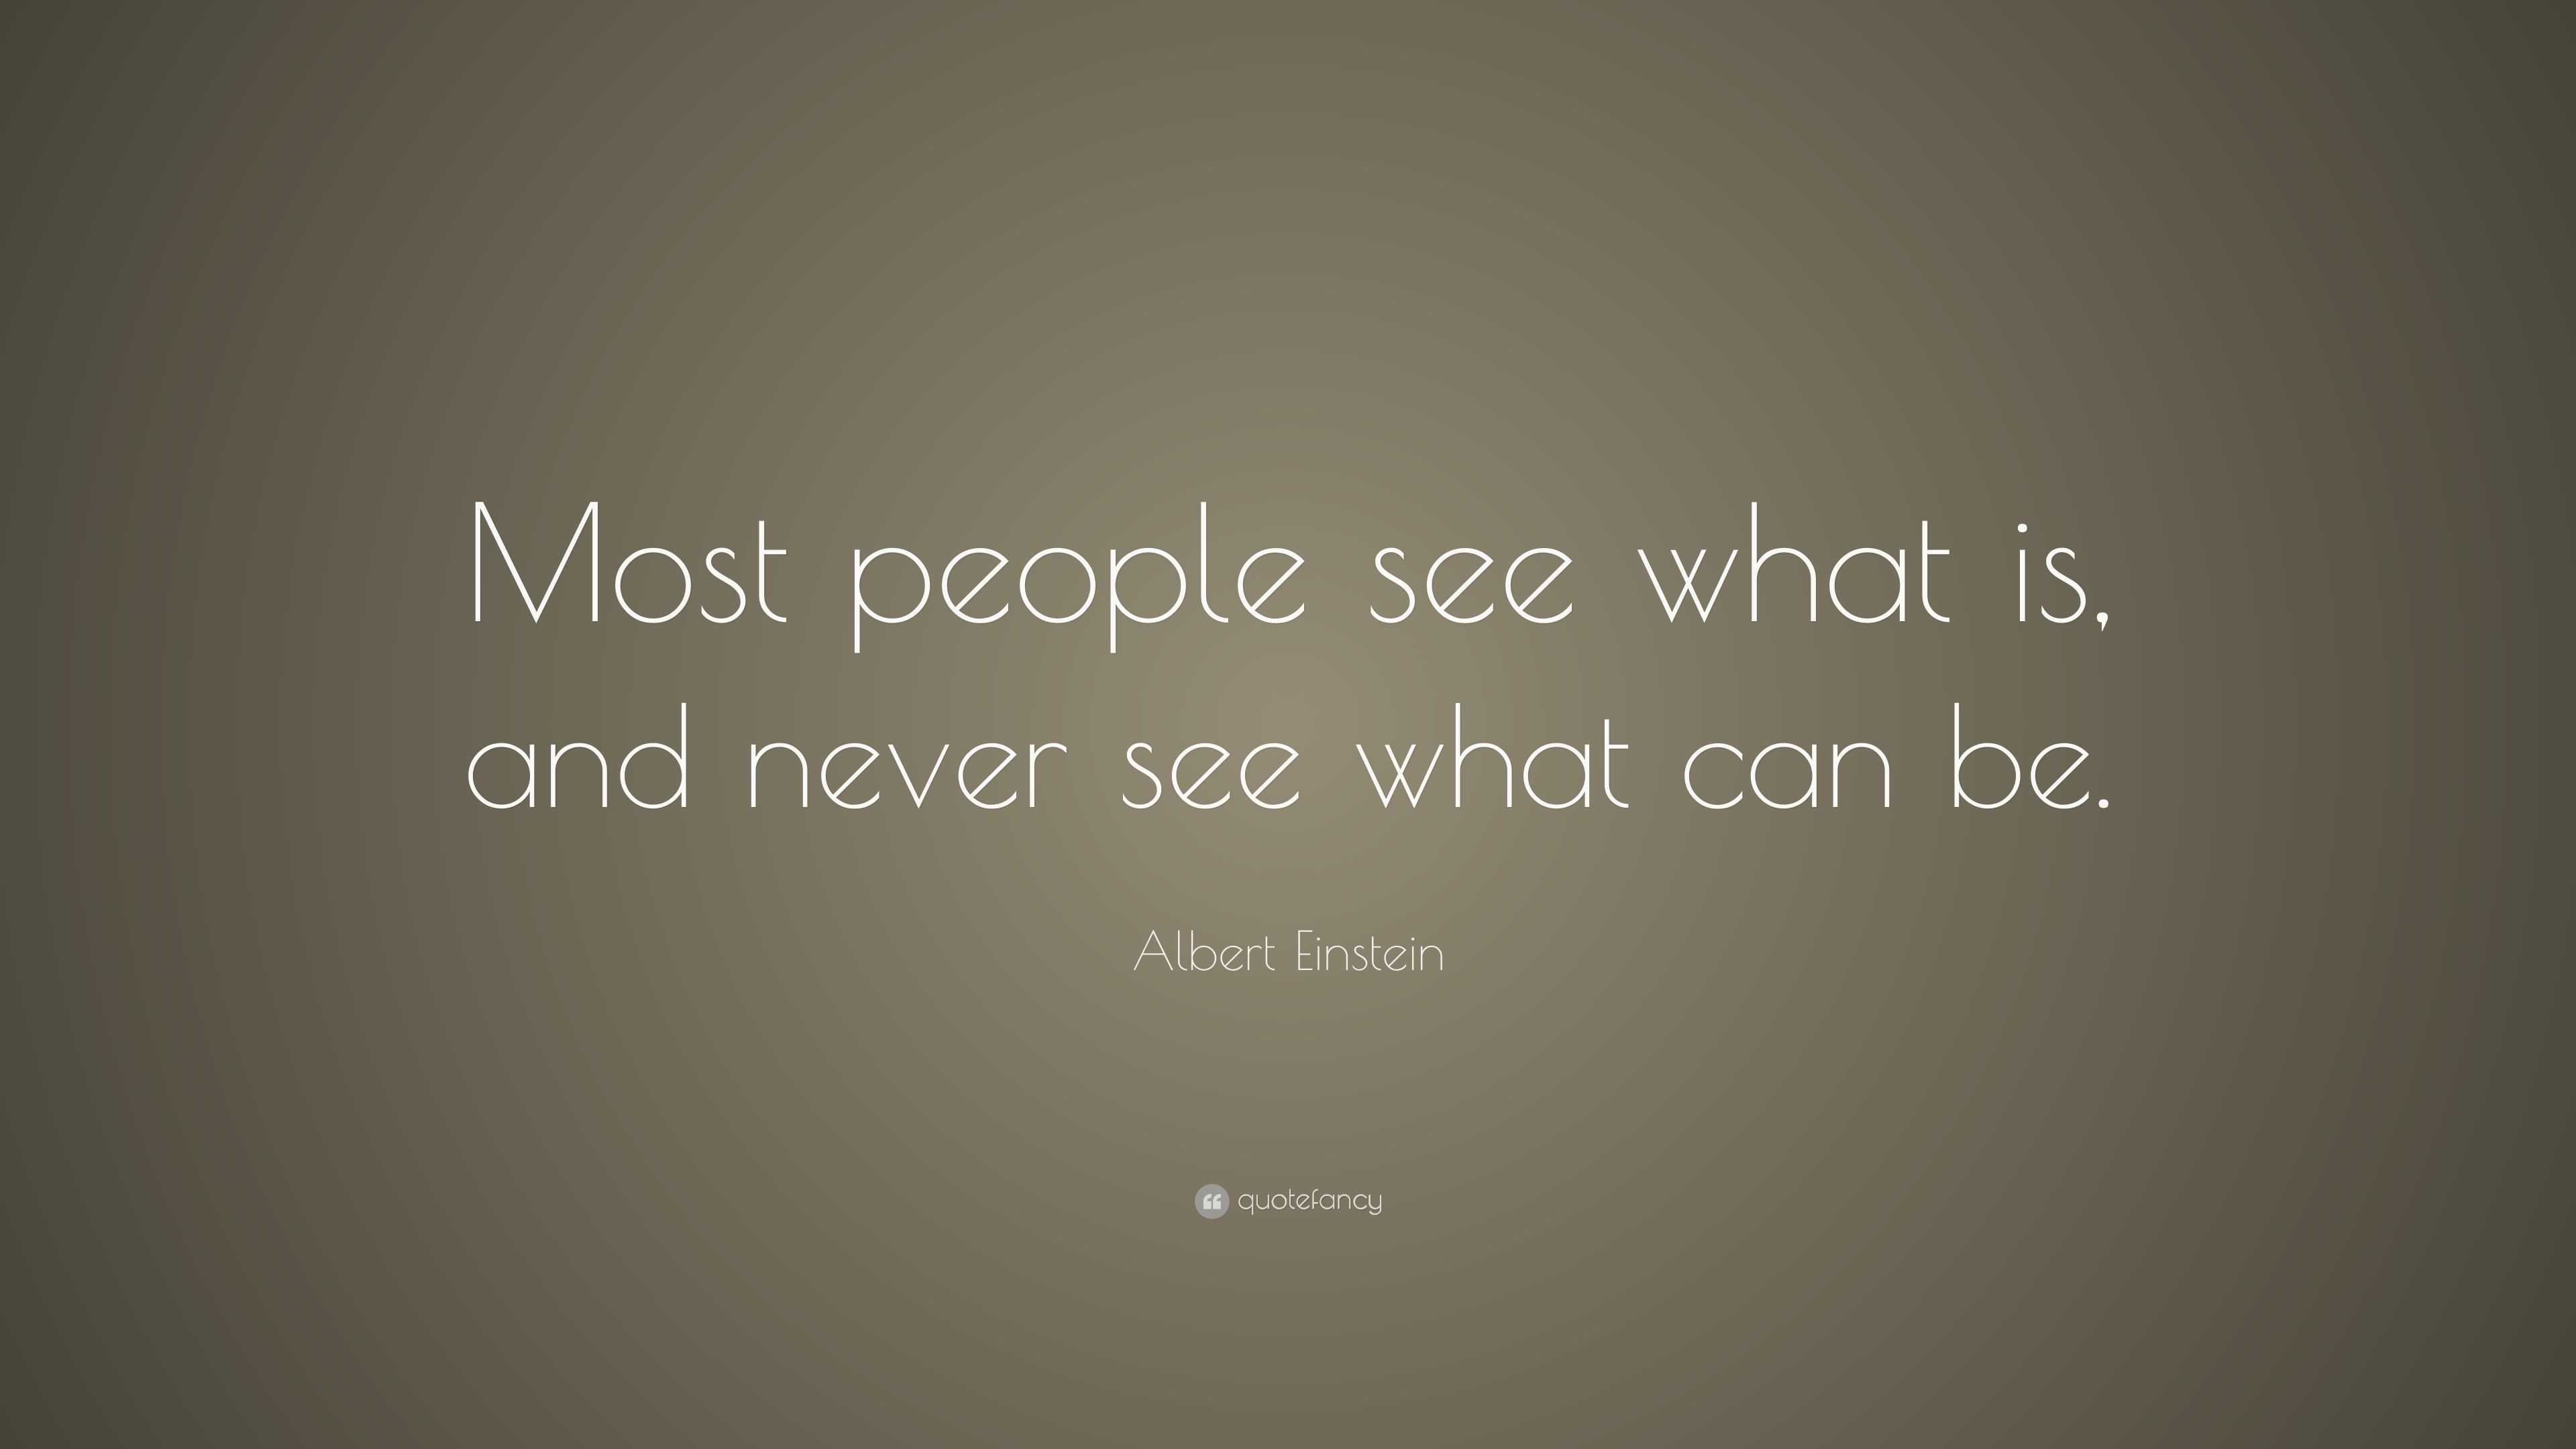 Albert Einstein Quote: “Most people see what is, and never see what can ...